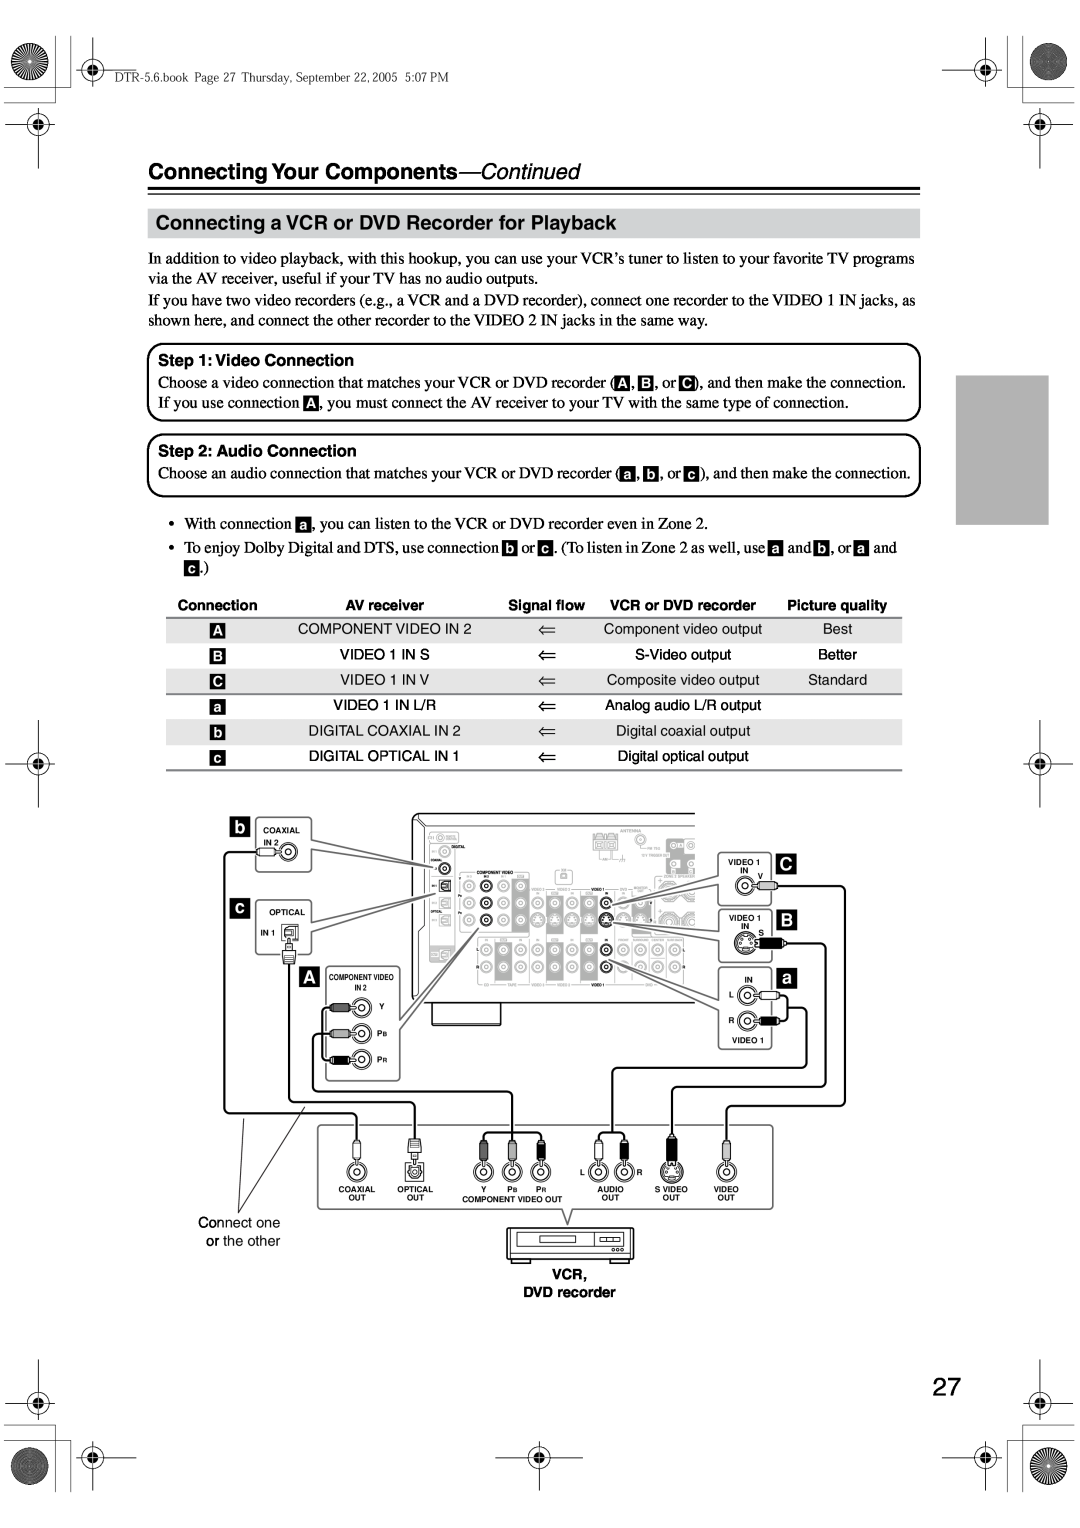 Integra DTR-5.6 instruction manual Connecting a VCR or DVD Recorder for Playback, Connecting Your Components—Continued 